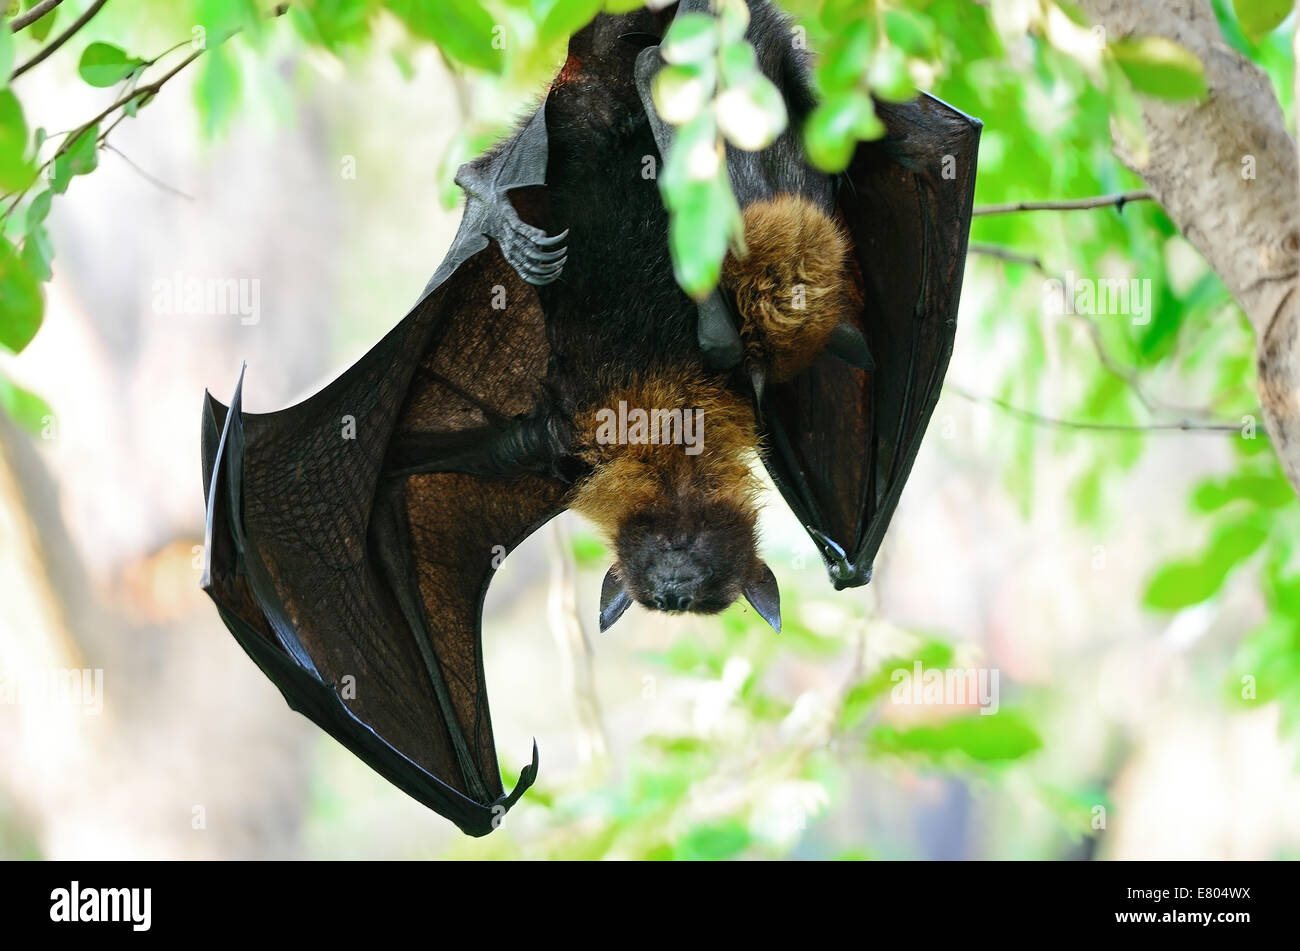 Large Bat, Hanging Flying Fox (Pteropus vampyrus), during the sleeping period in nature background Stock Photo